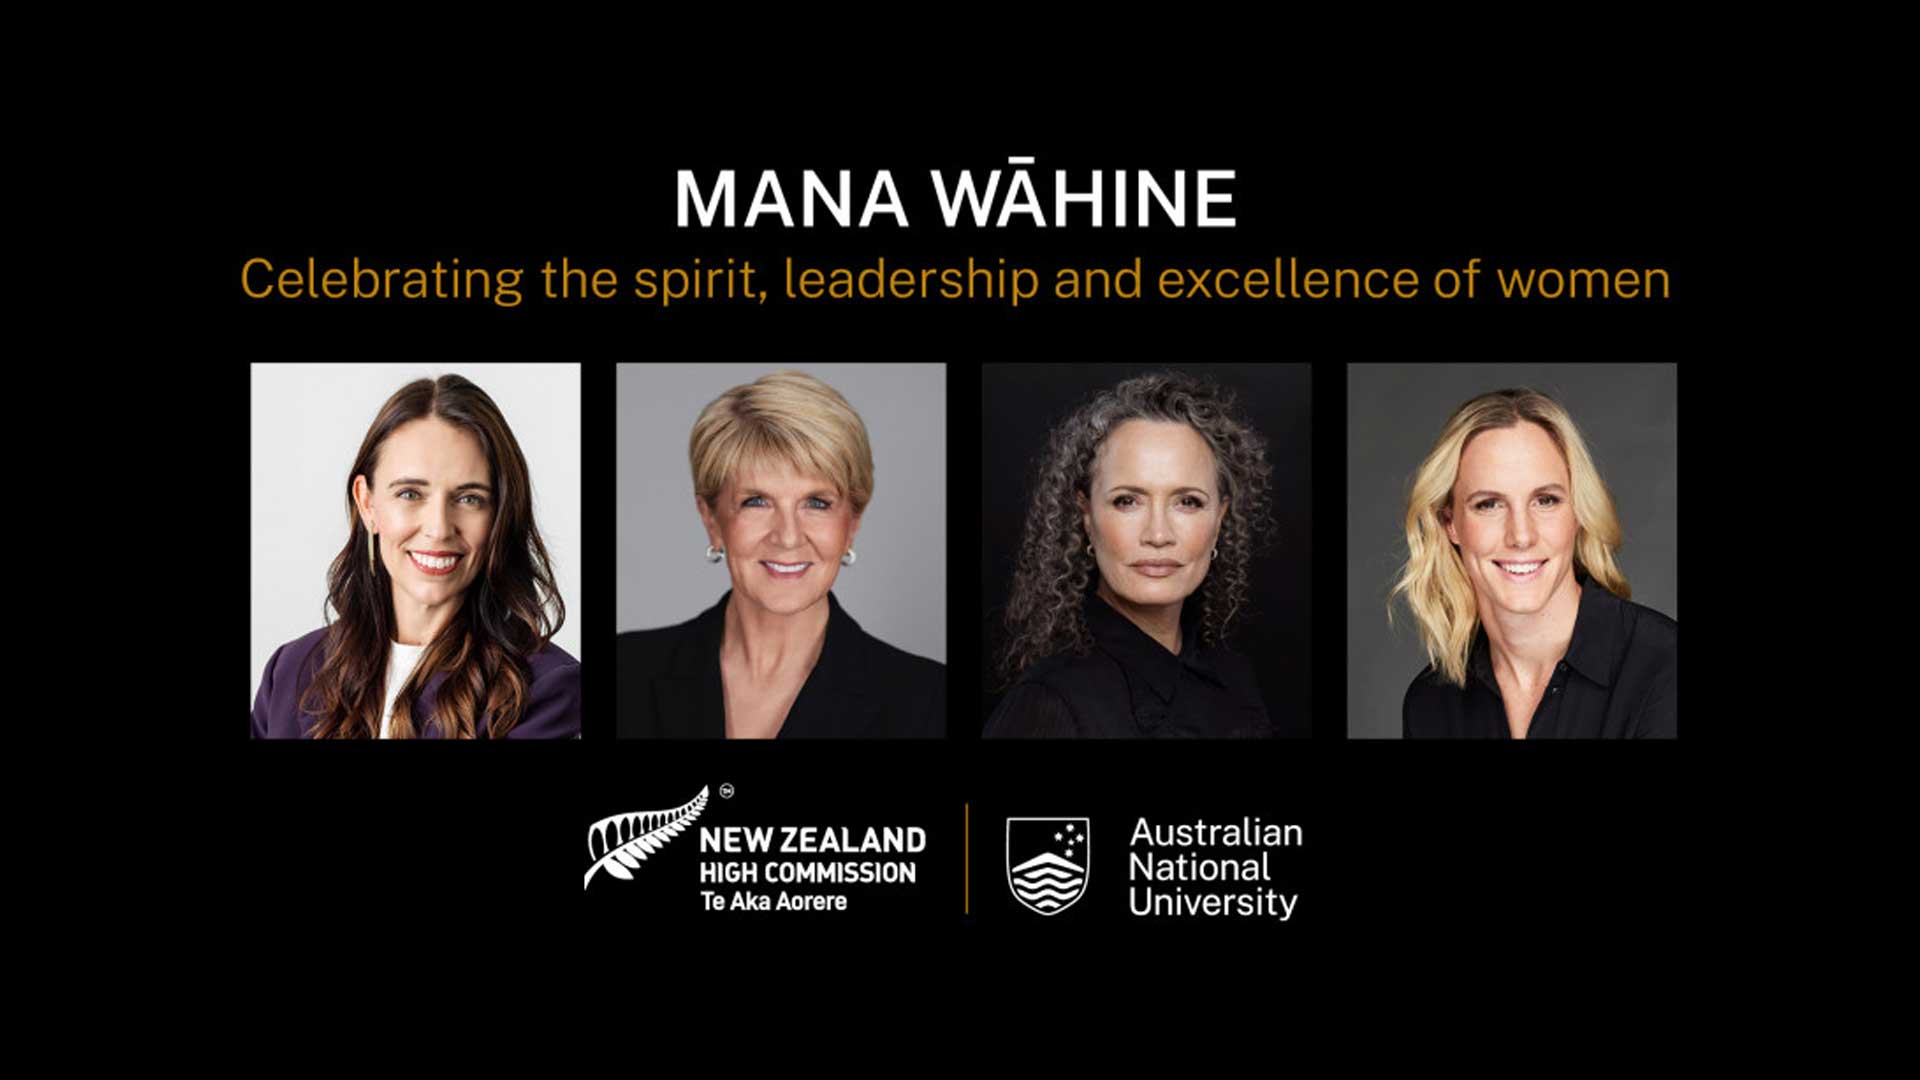 Four portrait photos of women against a black background. The title MANA WAHINE is across the top of the image, and the logos for ANU and the New Zealand High Commission are across the bottom